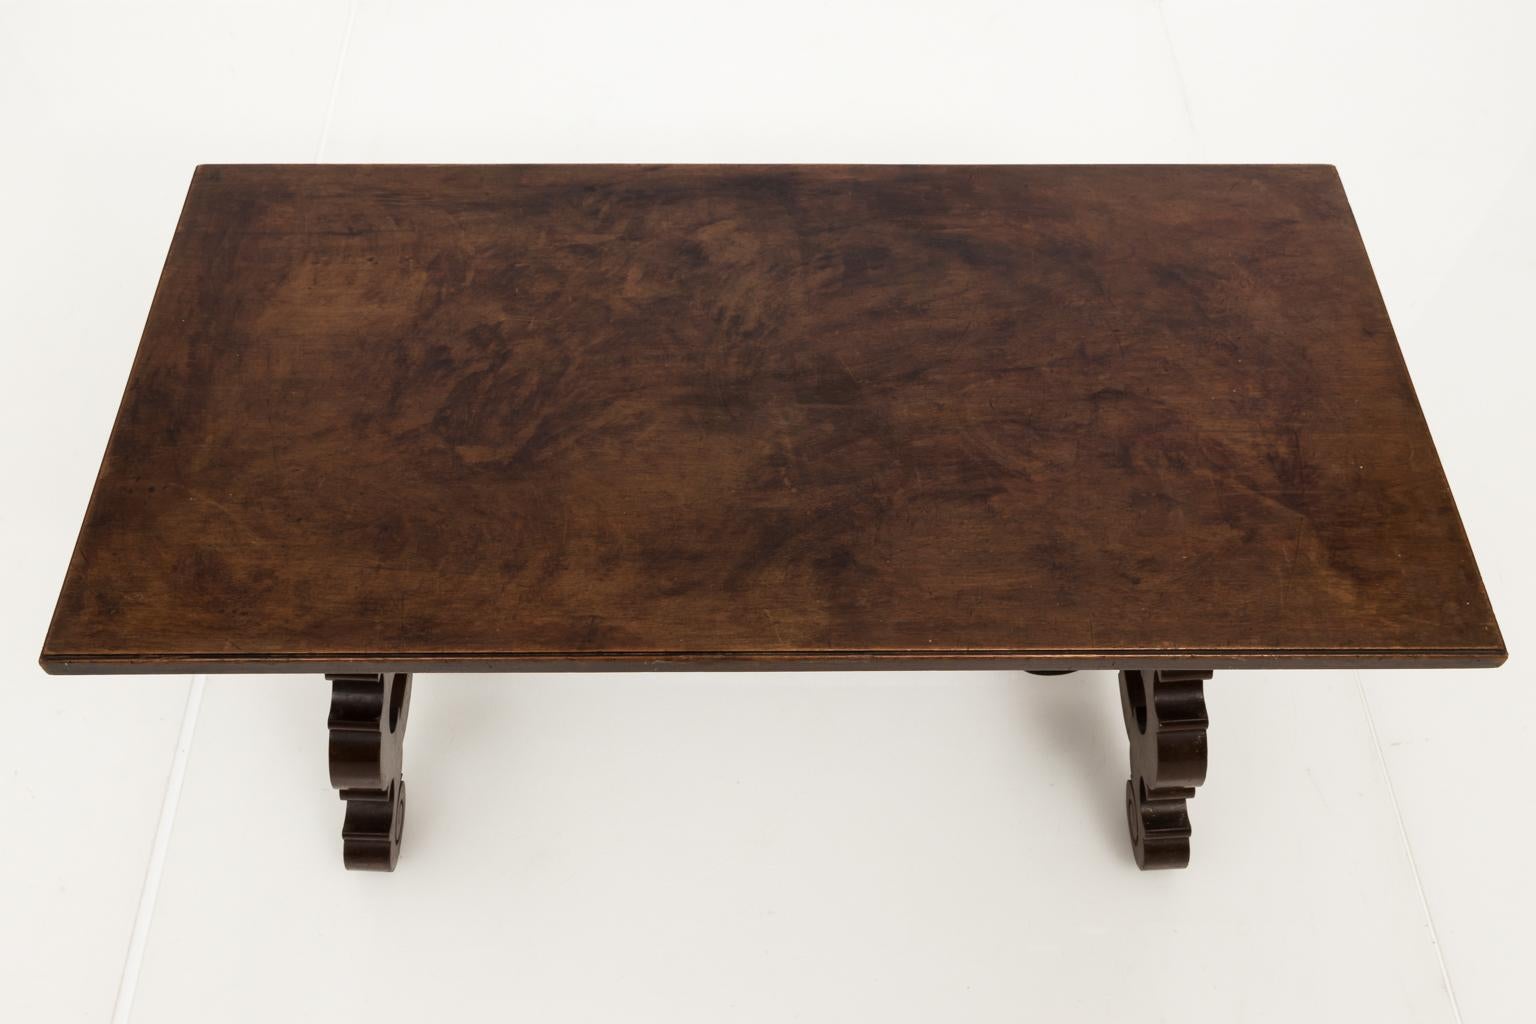 Italian Renaissance Style Walnut and Brass Trestle Coffee Table, circa 1950s For Sale 5